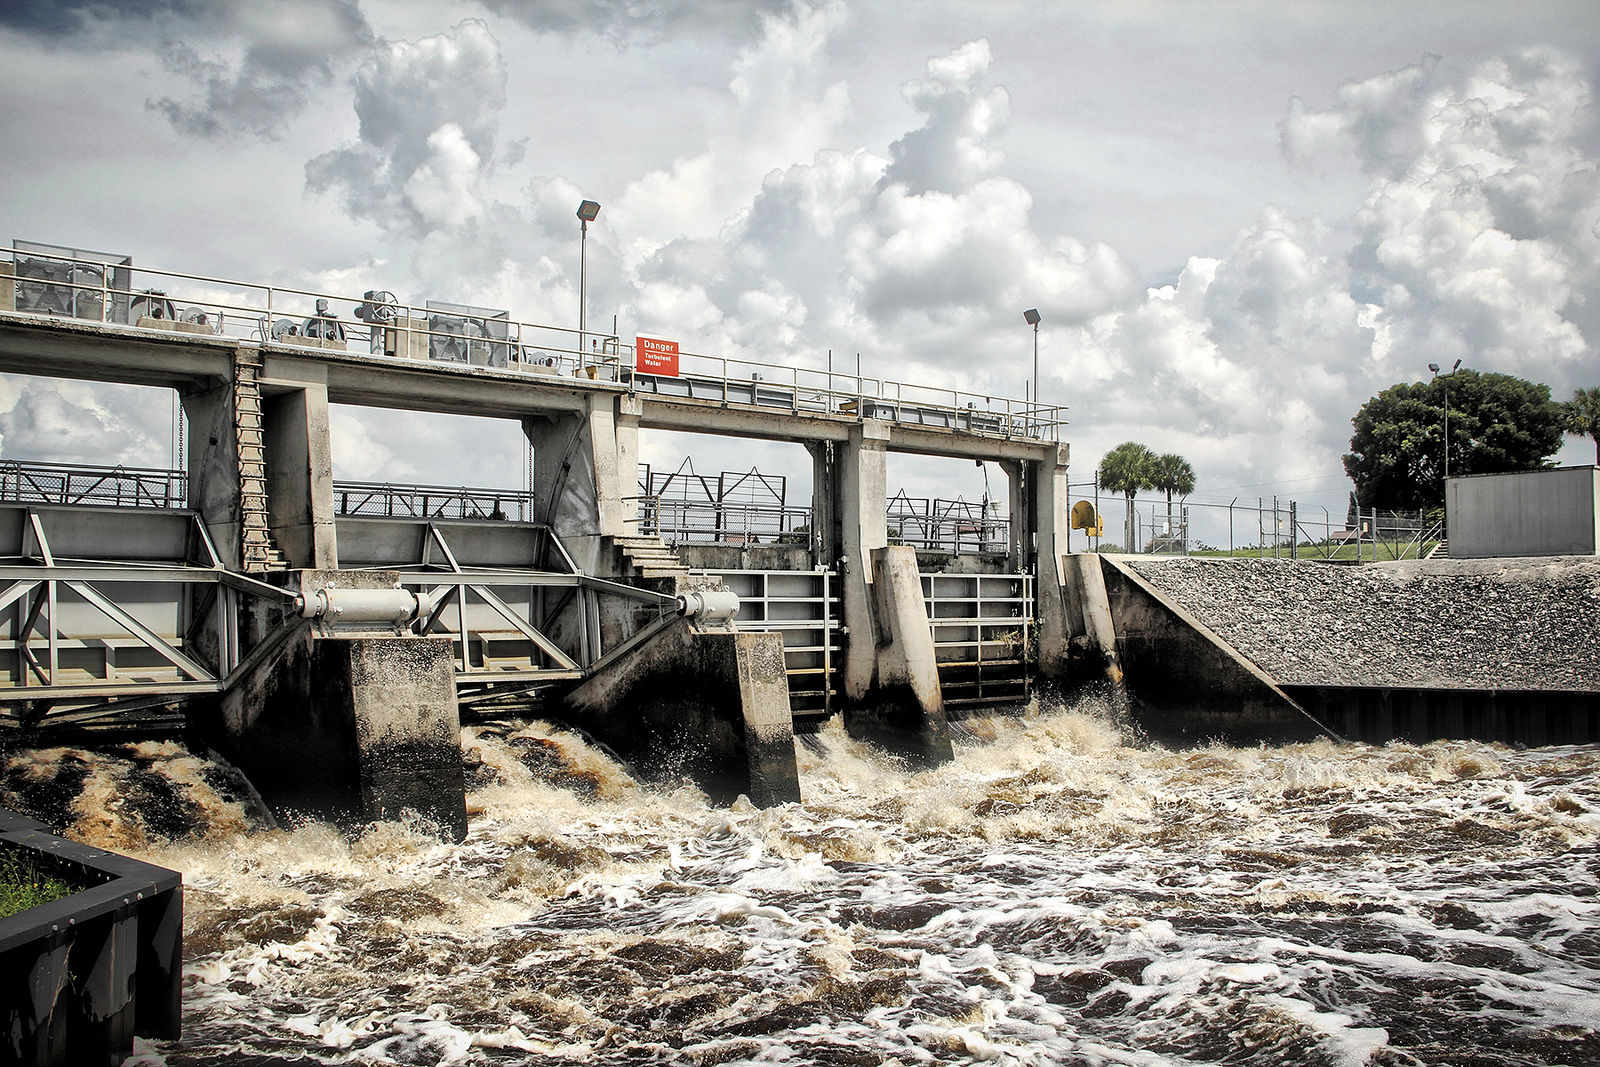 Nutrient-rich water pollutes the Caloosahatchee River in the Summer of 2013, prompting frustration in the area. (Photo by Dale, via Creative Commons)